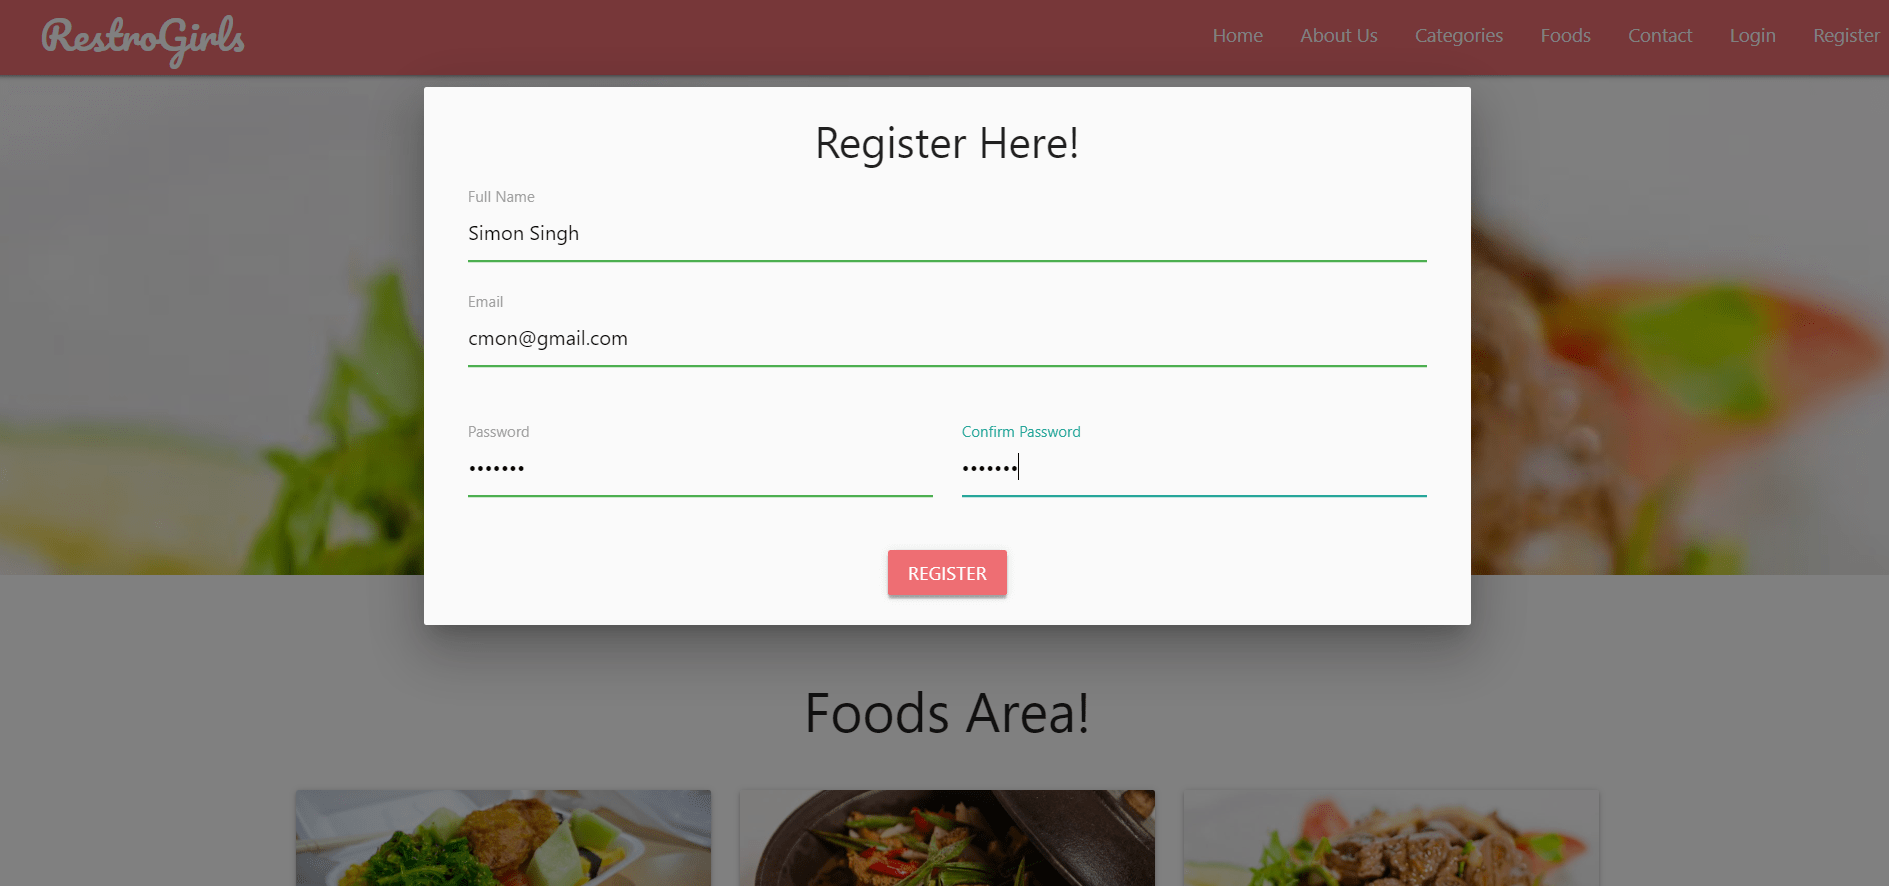 Screenshot 98 - ONLINE RESTAURANT MANAGEMENT SYSTEM IN PHP WITH SOURCE CODE